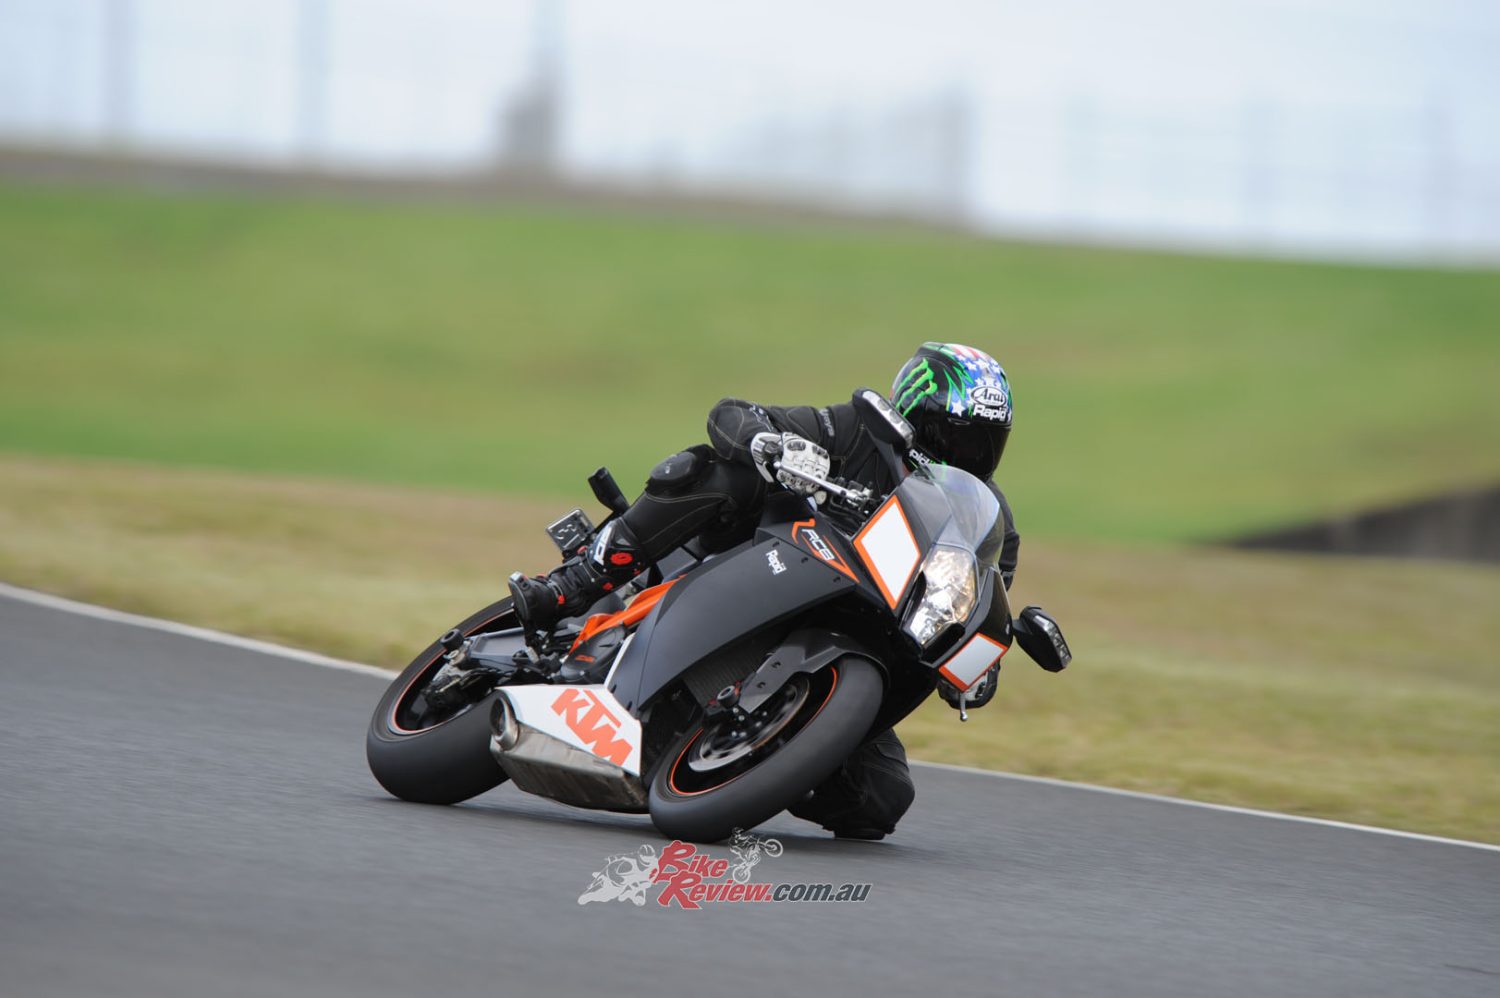 Jeff mentioned that the second he hopped on the RC8R, he felt at home and comfortable to give 100% on the track.